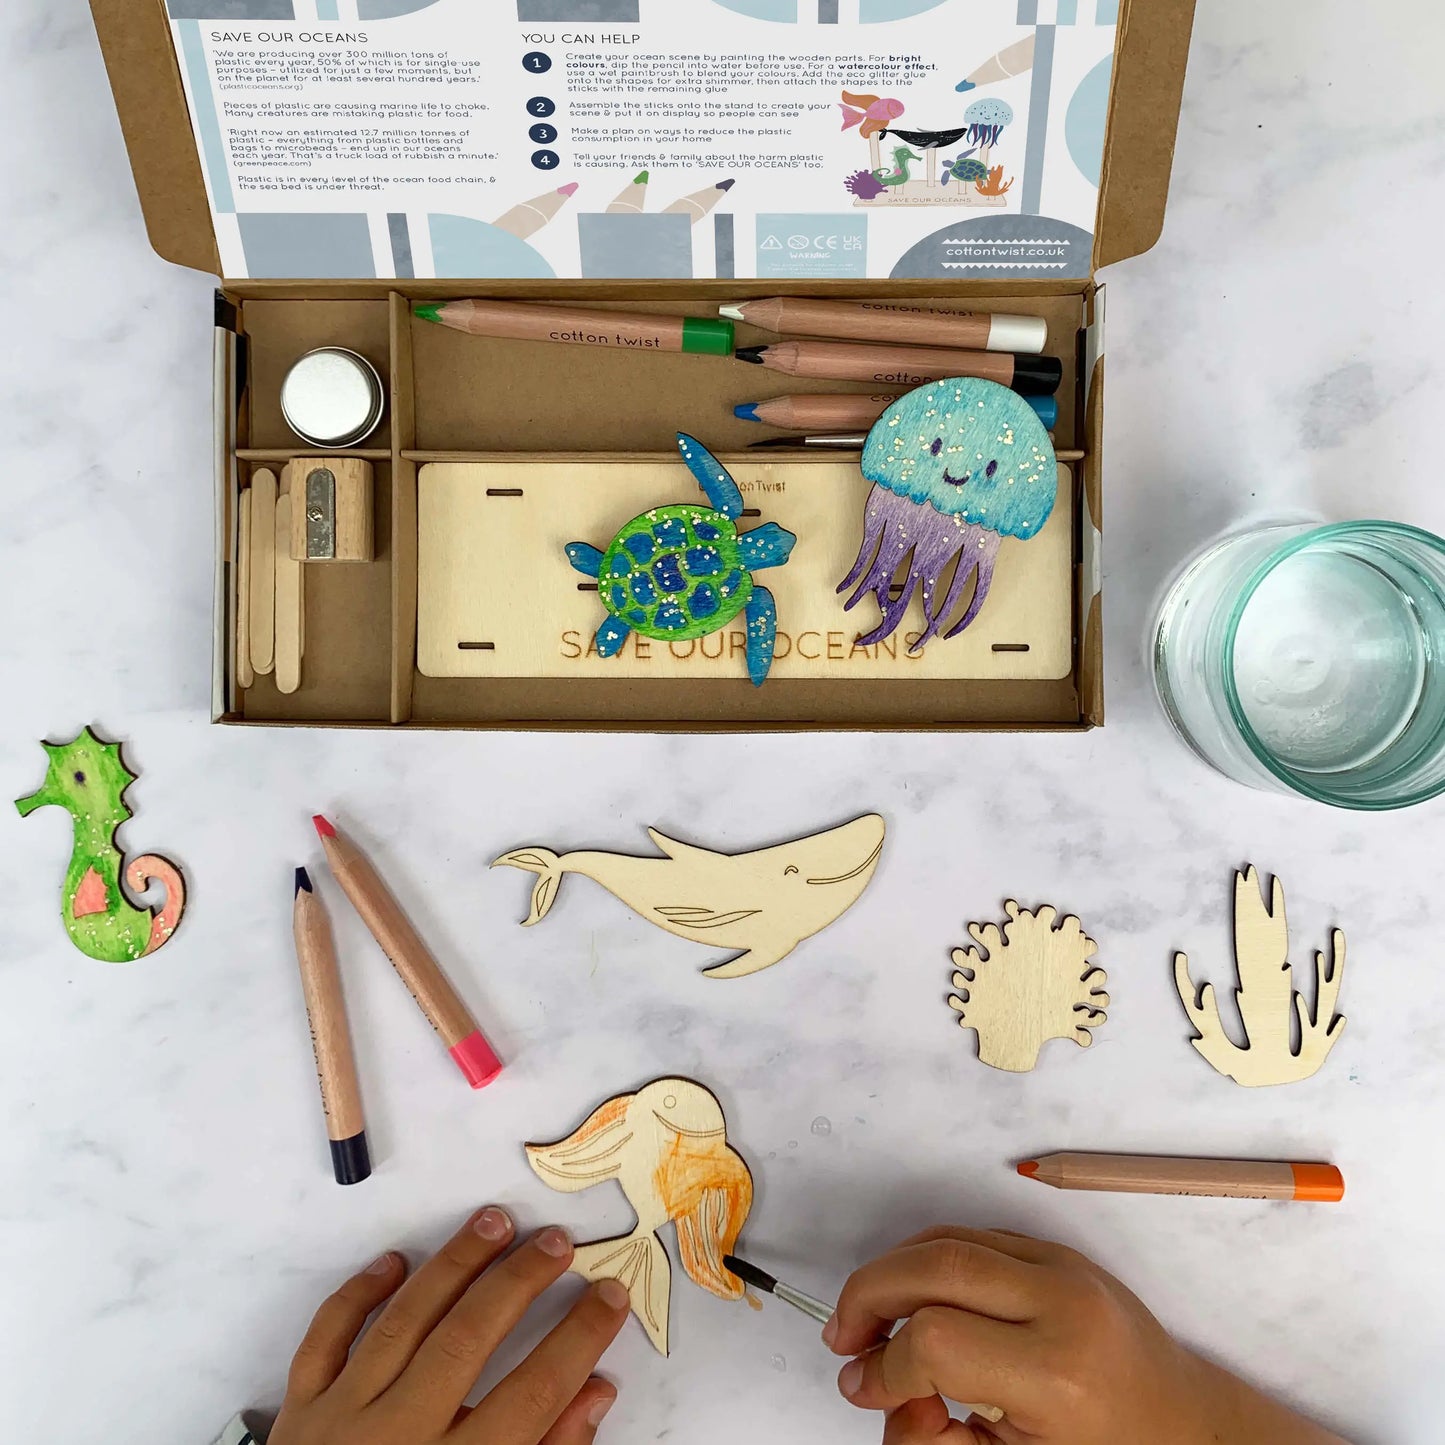 Save Our Oceans Craft Kit By Cotton Twist